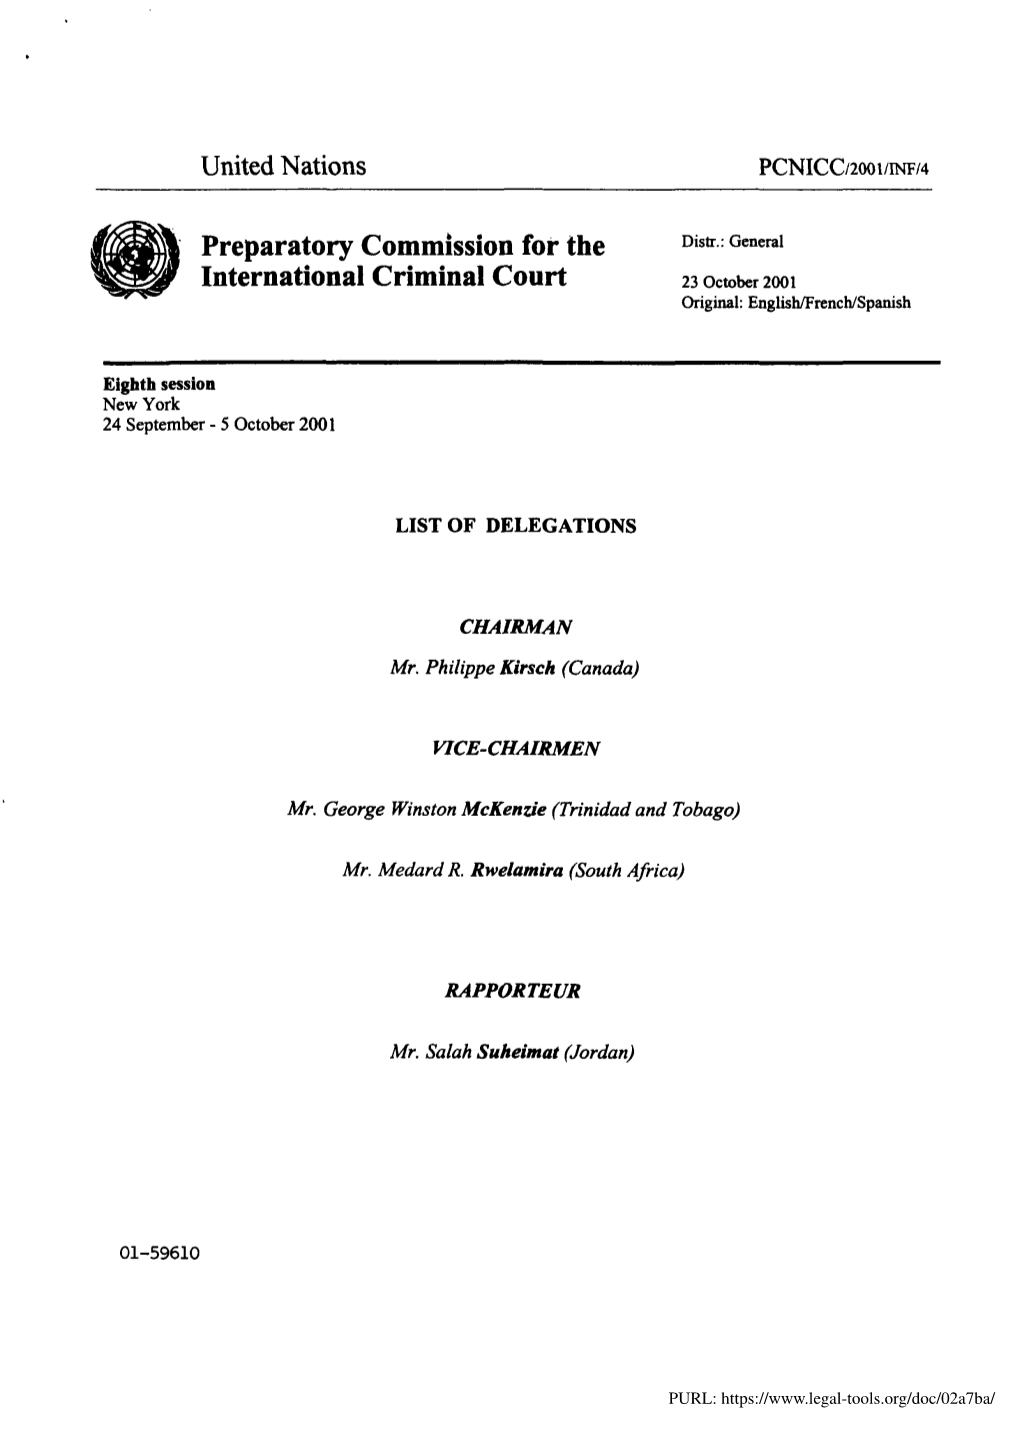 Preparatory Commission for the International Criminal Court Pursuant to Para&Of* 7 of Genend Assembly Resolution 53/105 of 8